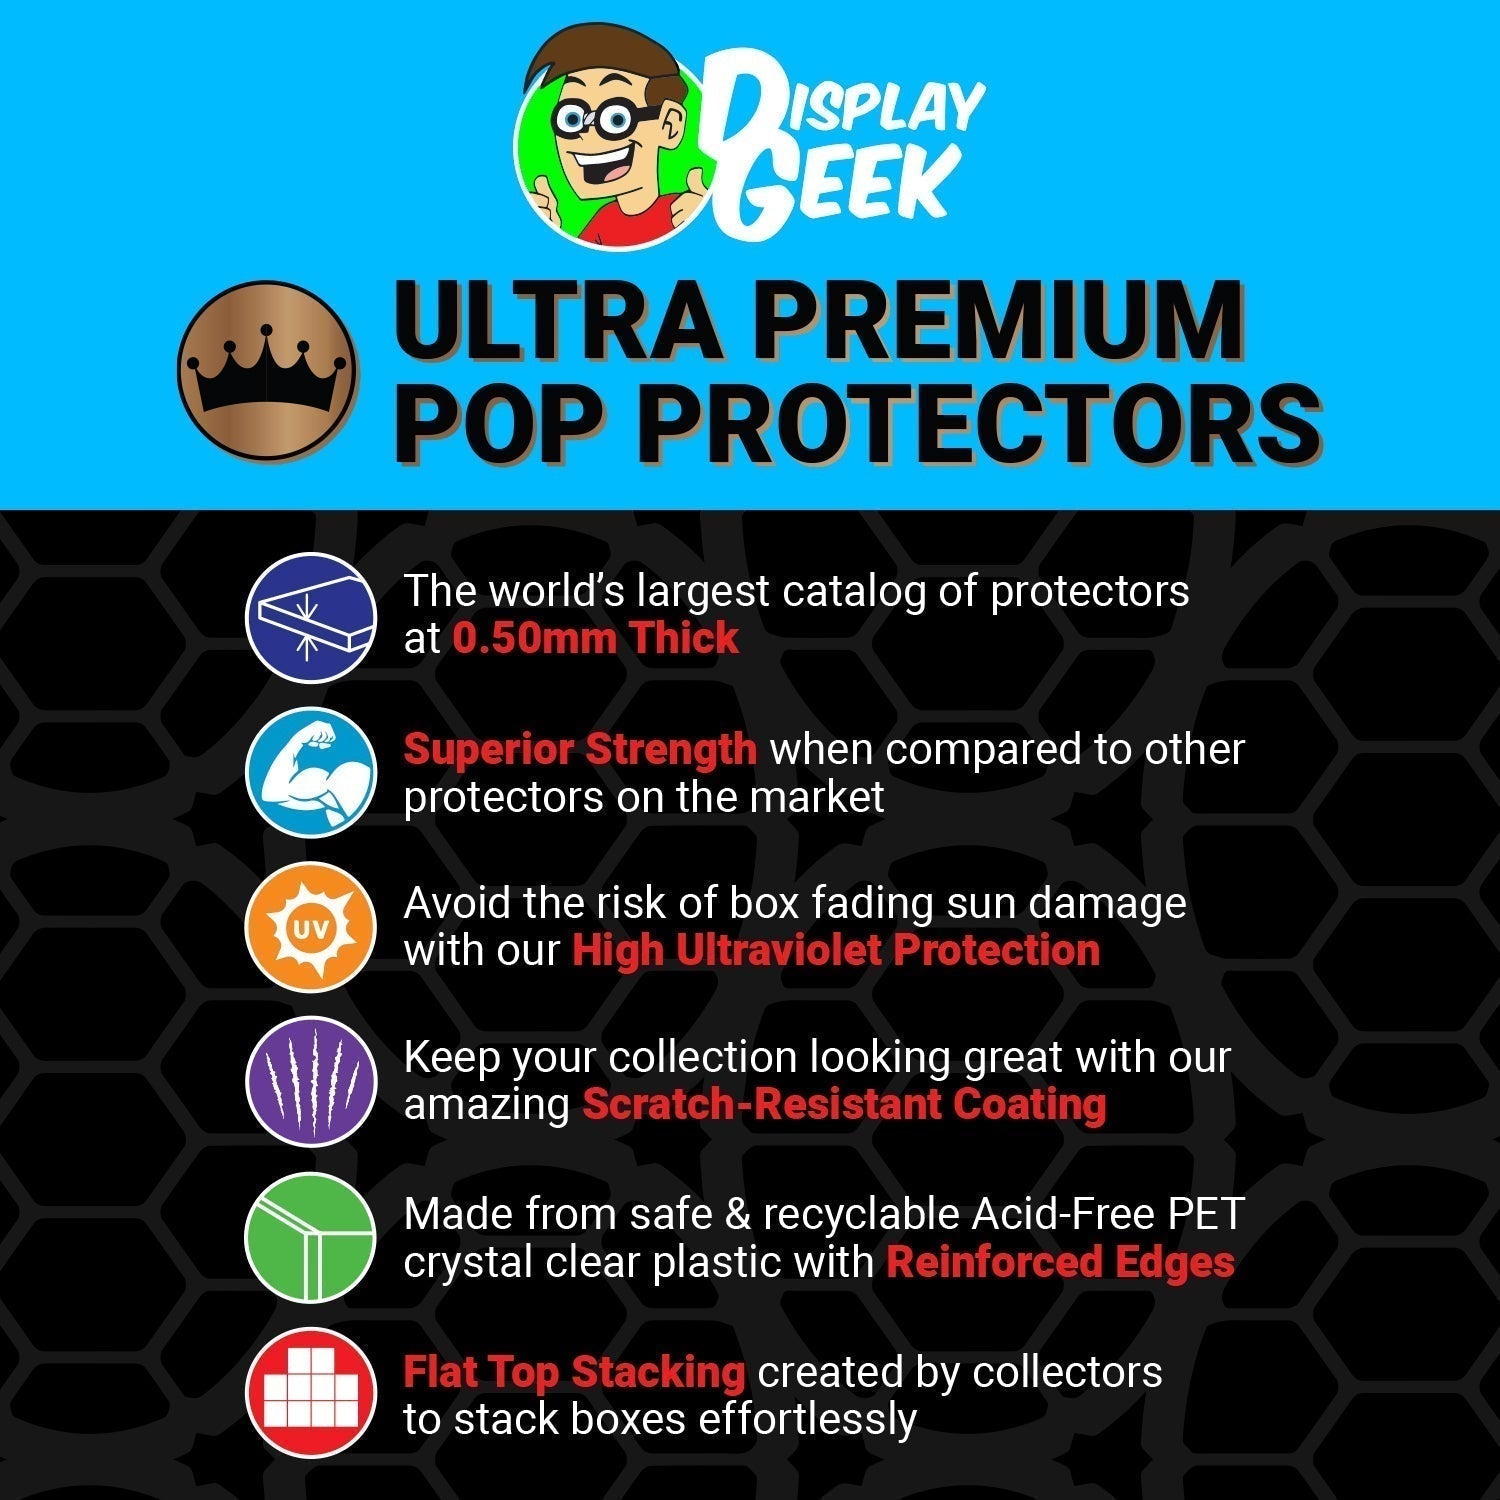 Pop Protector for Funkoverse Darkwing Duck 100 ECCC Funko Expansion - PPG Pop Protector Guide Search Created by Display Geek